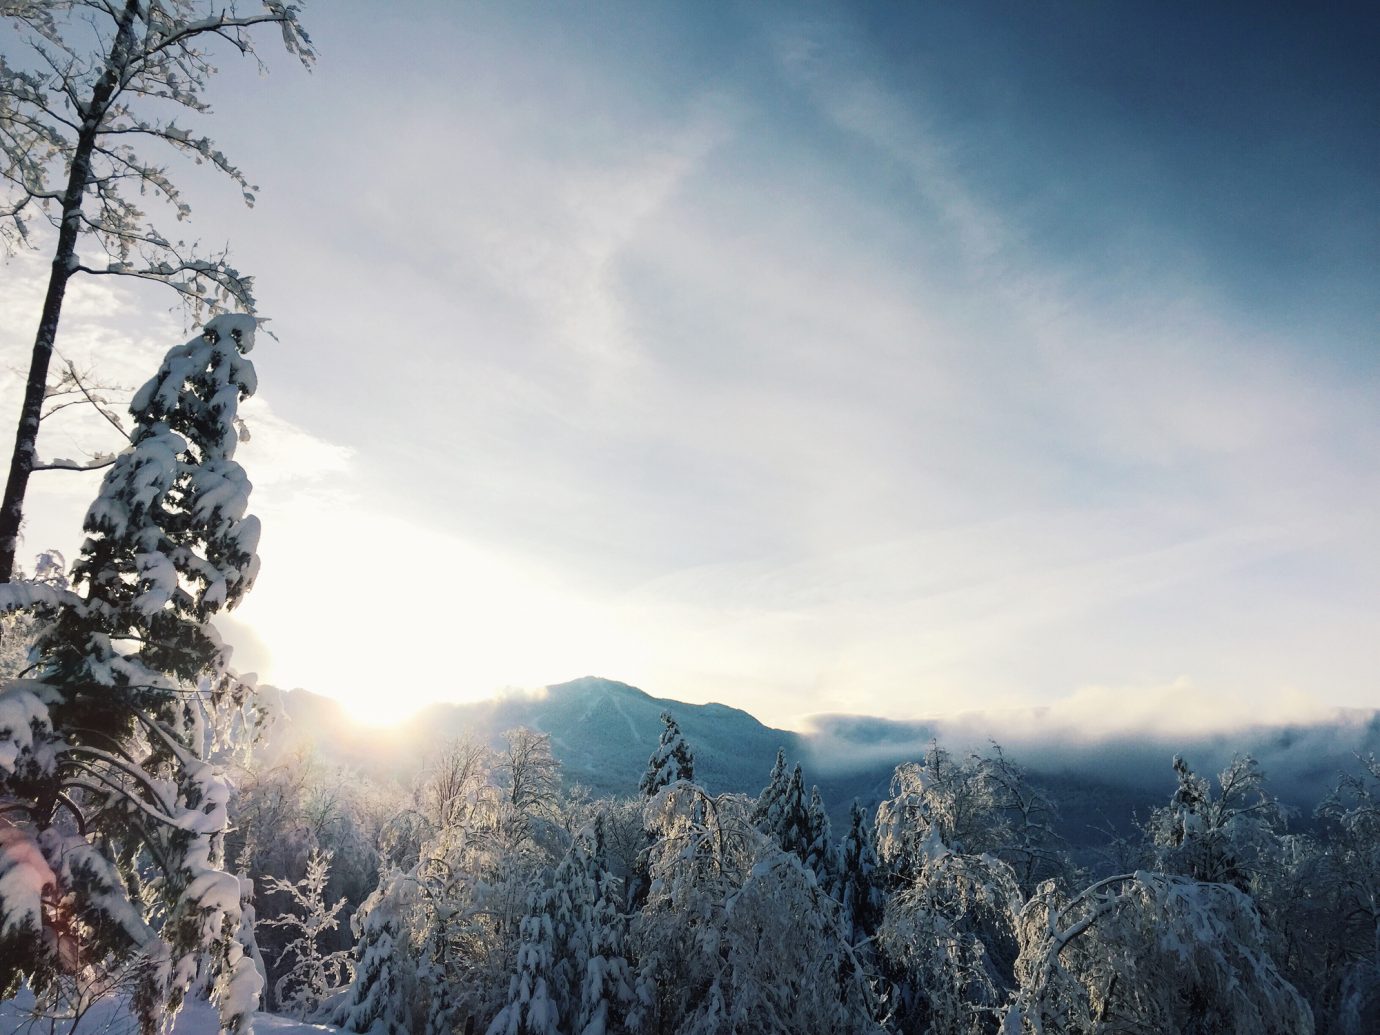 Looking eastward toward the mountains near Smuggler's Notch in Vermont in wintertime. The sun is rising and partially visible as it crests the hills. The trees are covered in hoarfrost.